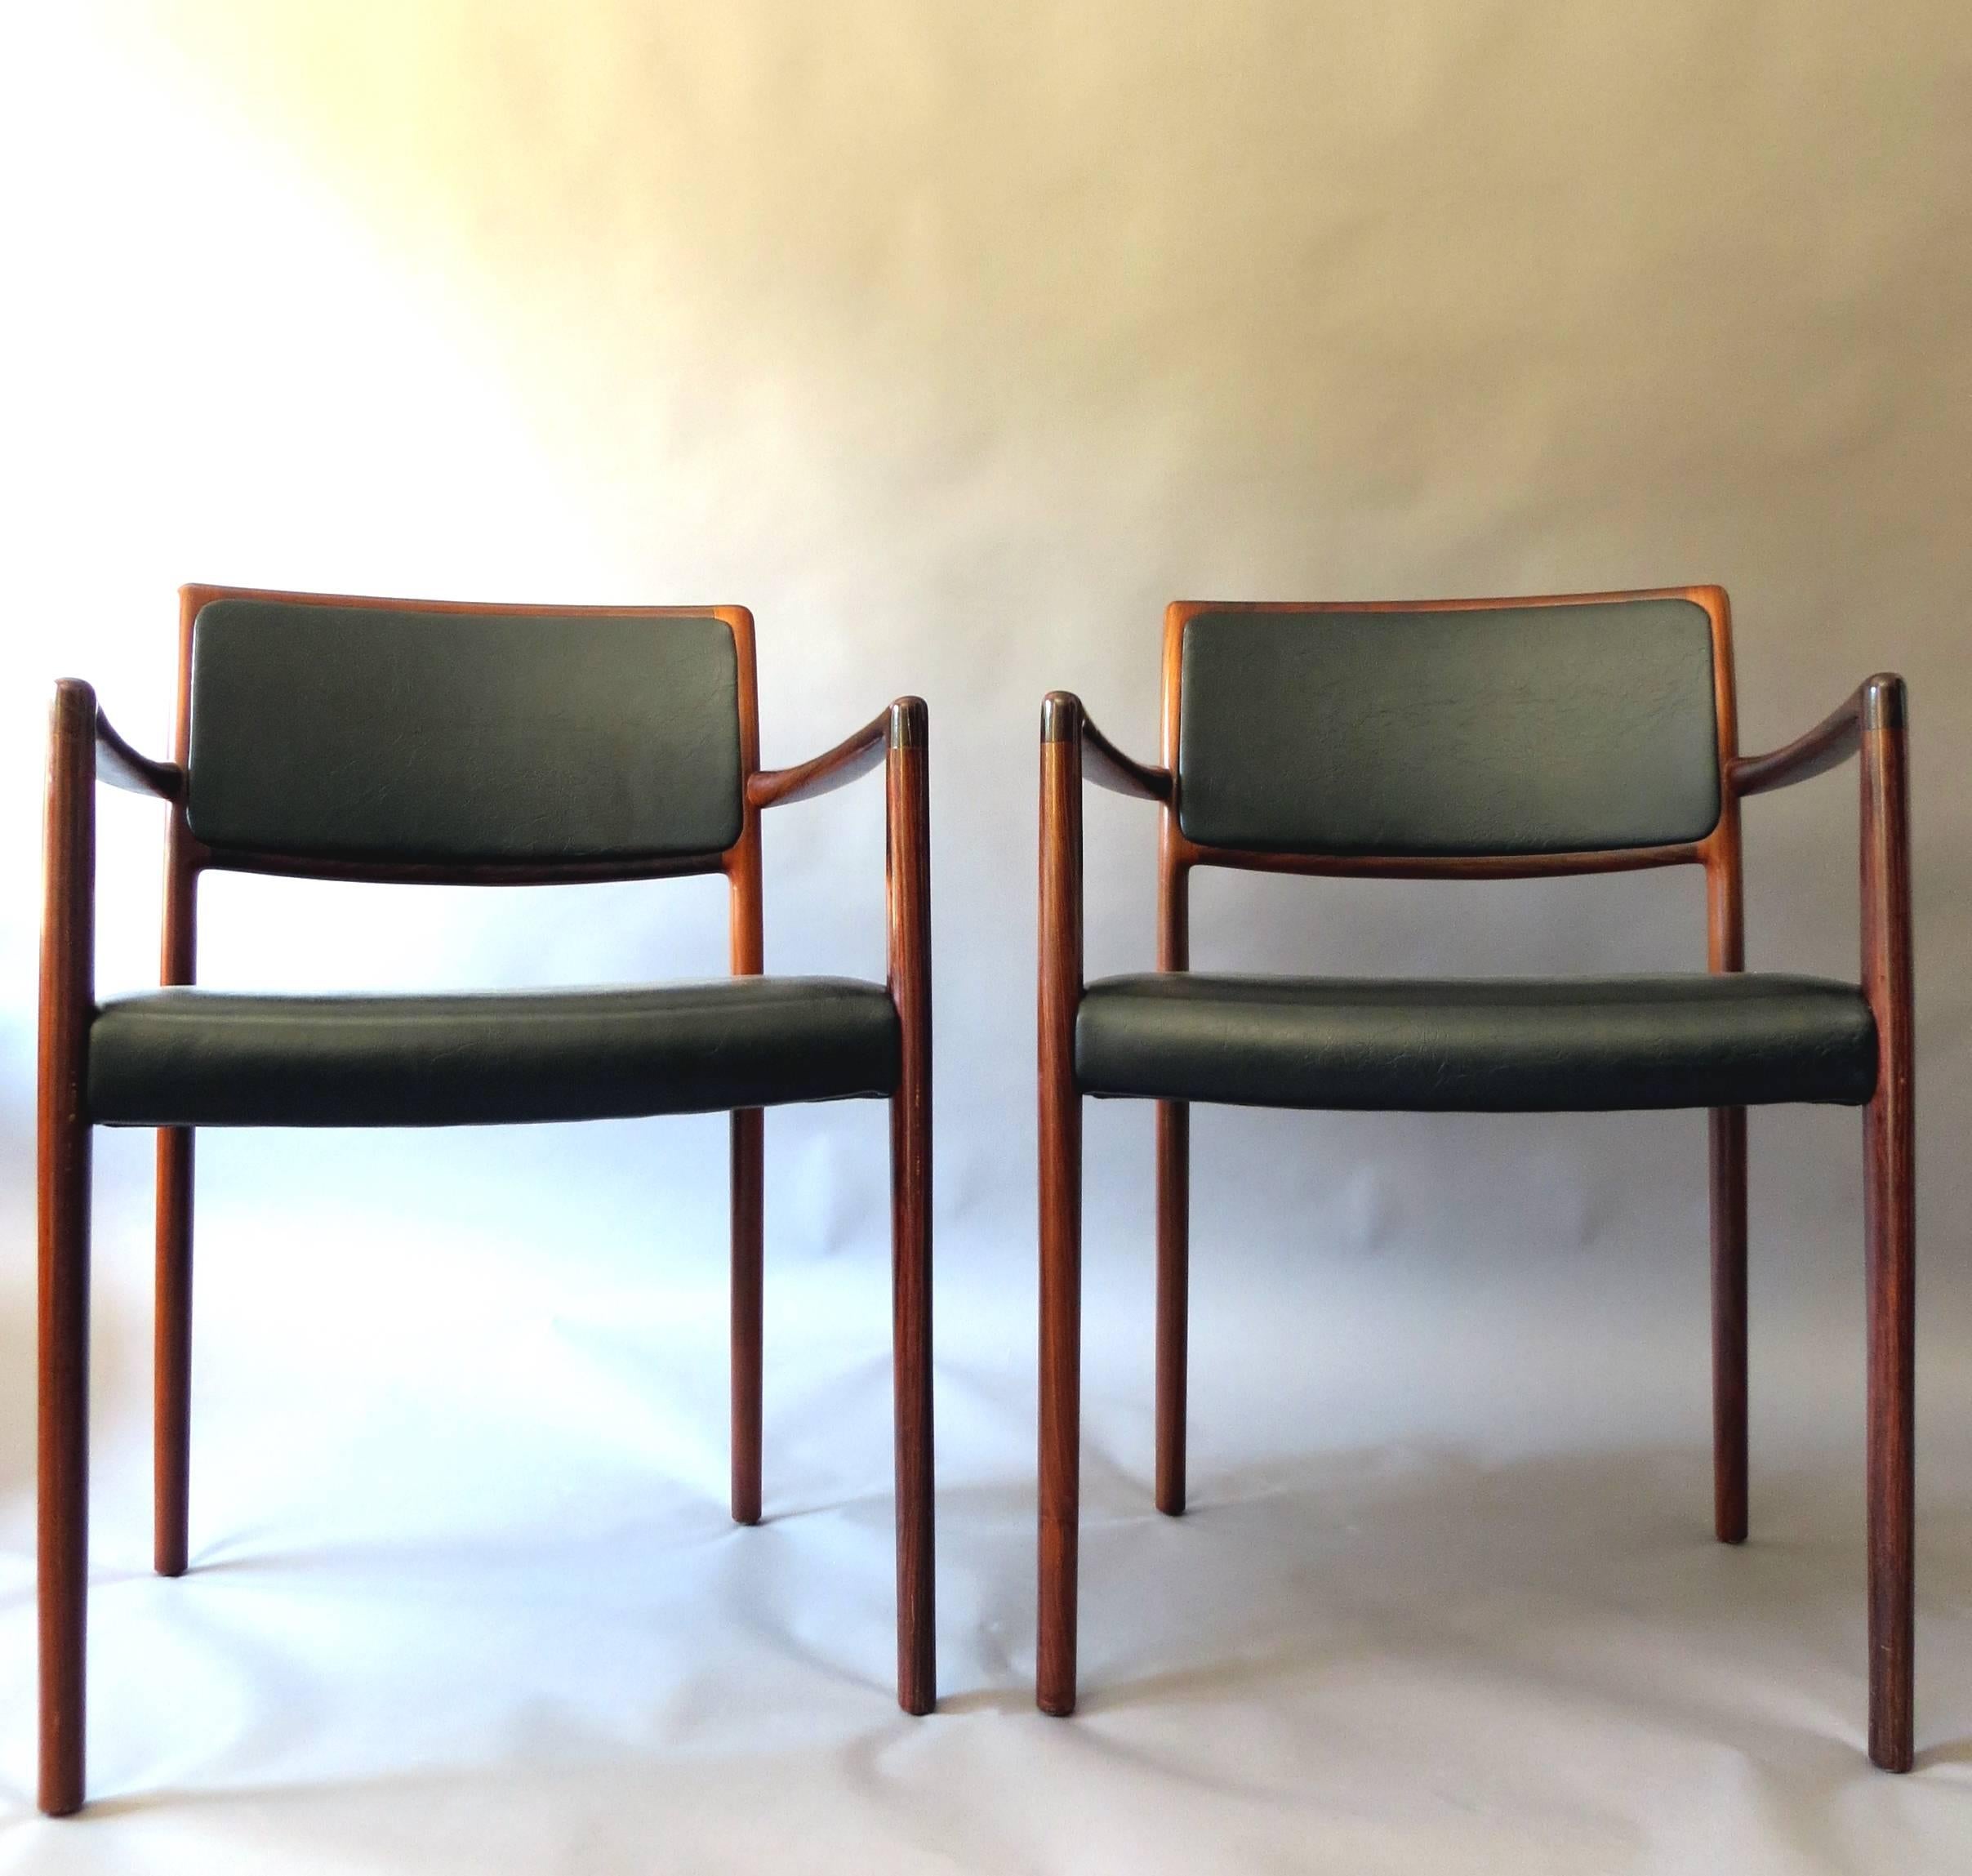 Danish Mid-Century Modern Rosewood and Leather Dining Chairs, Set of Two, 1960s (Dänisch) im Angebot